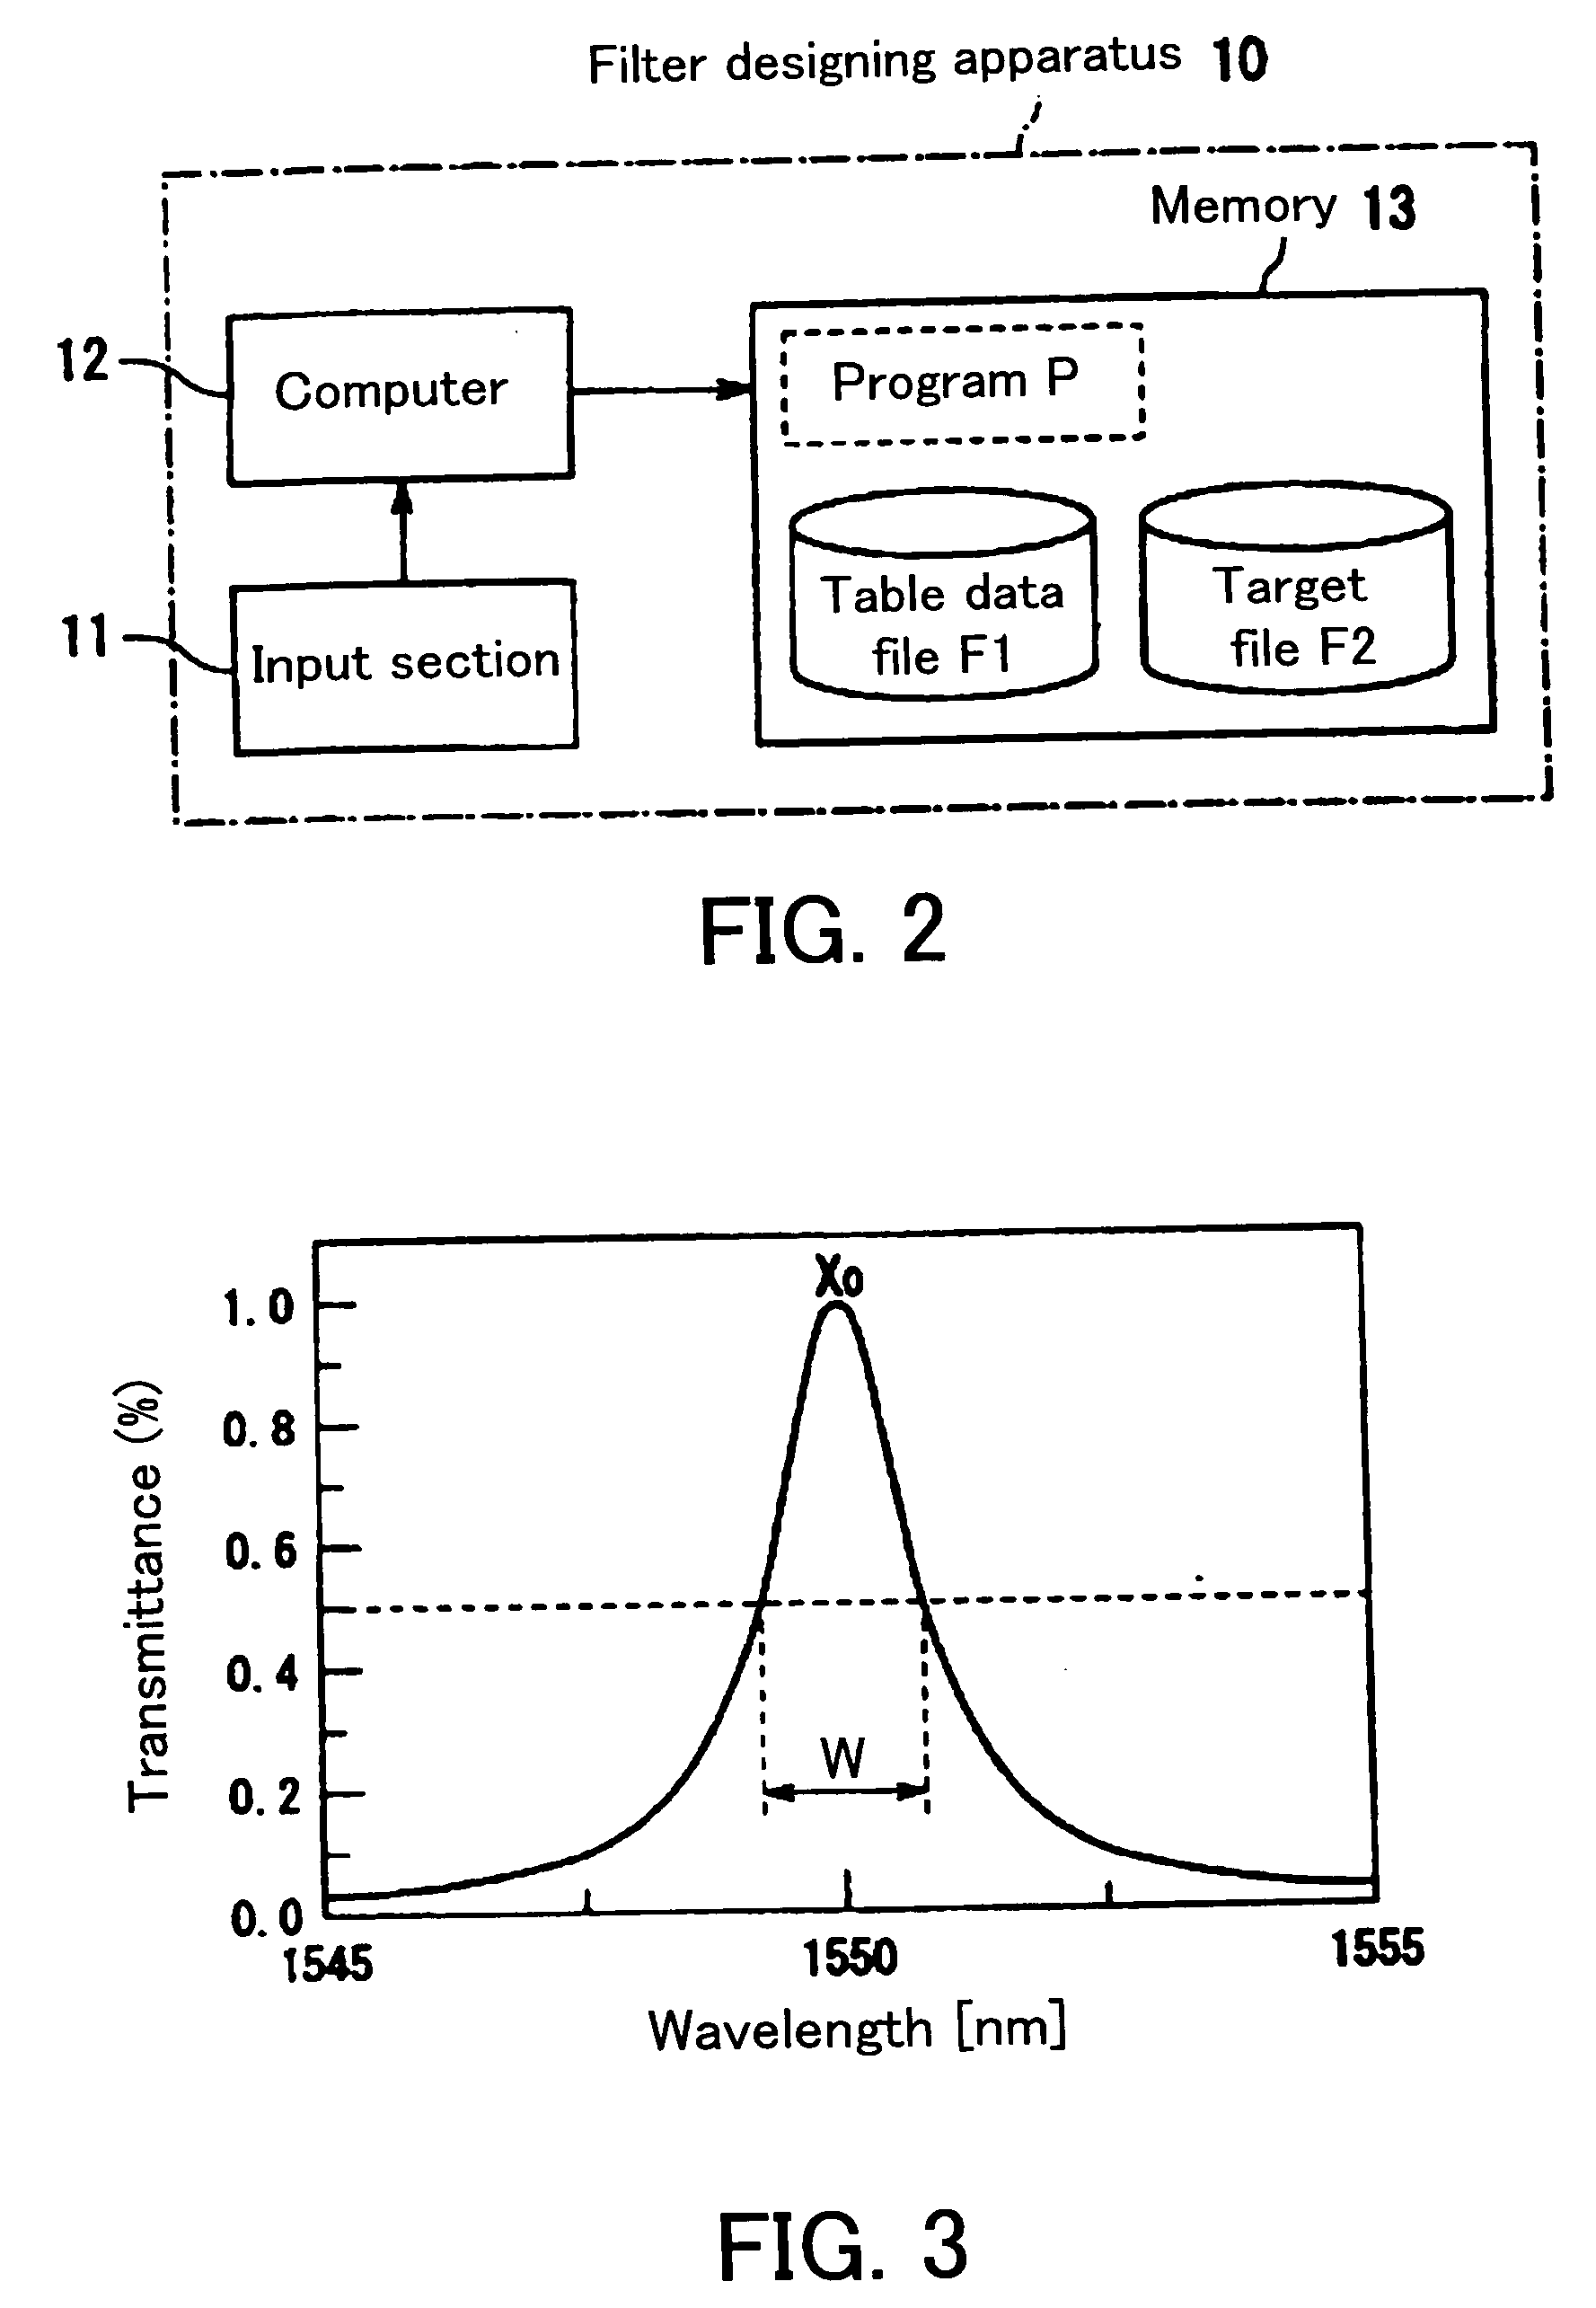 Dielectric multi layer thin film optical filter having predetermined wavelength optical characteristics, a method of manufacturing the same, a program for designing the same, and an optical add-drop system using the dielectric multi layer thin film optical filter